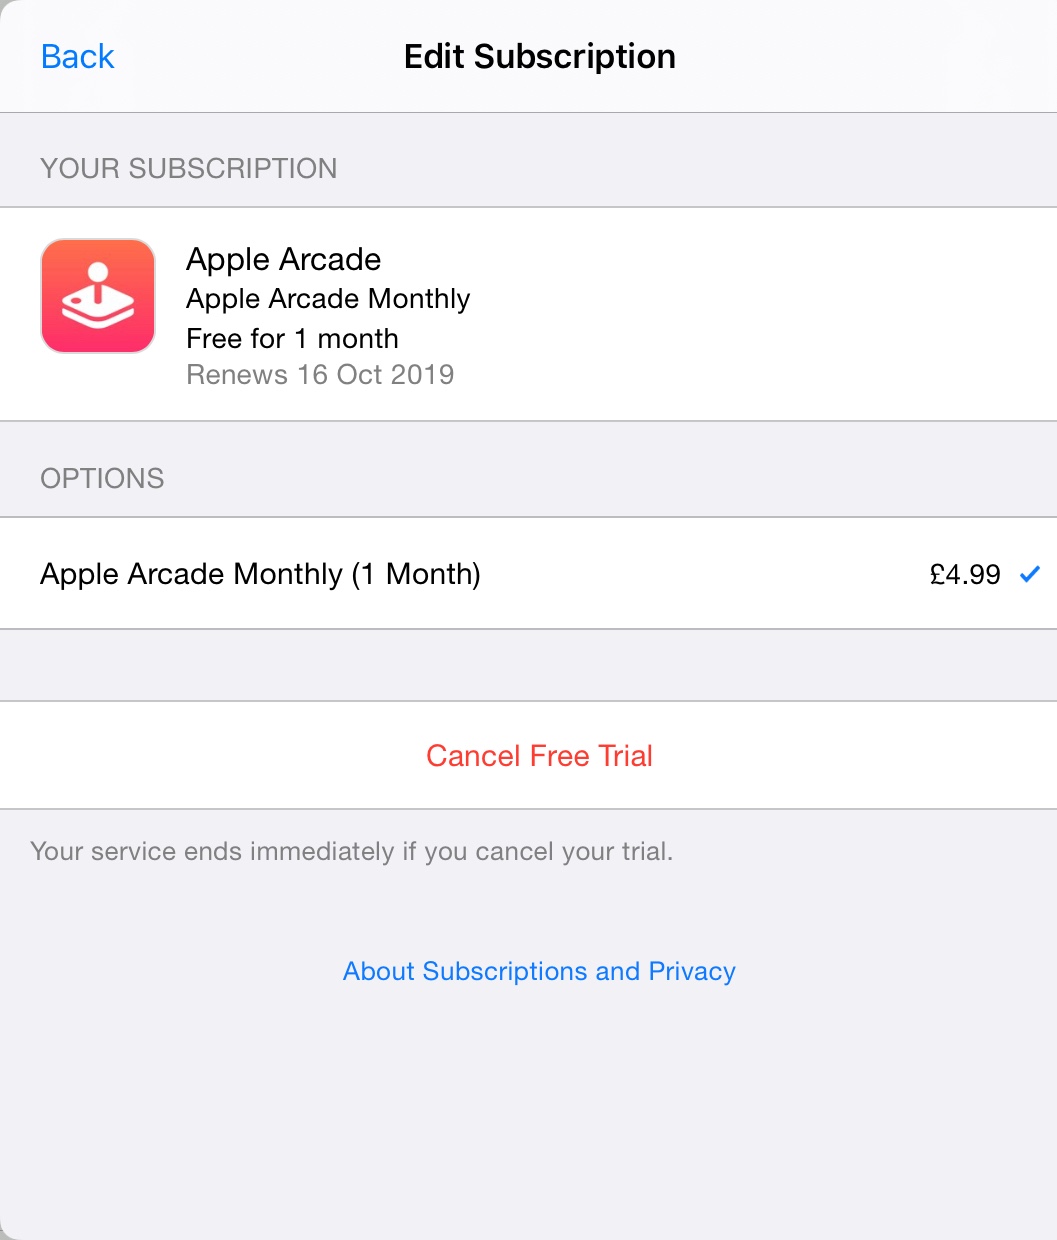 Why is Apple not letting me cancel free trial?